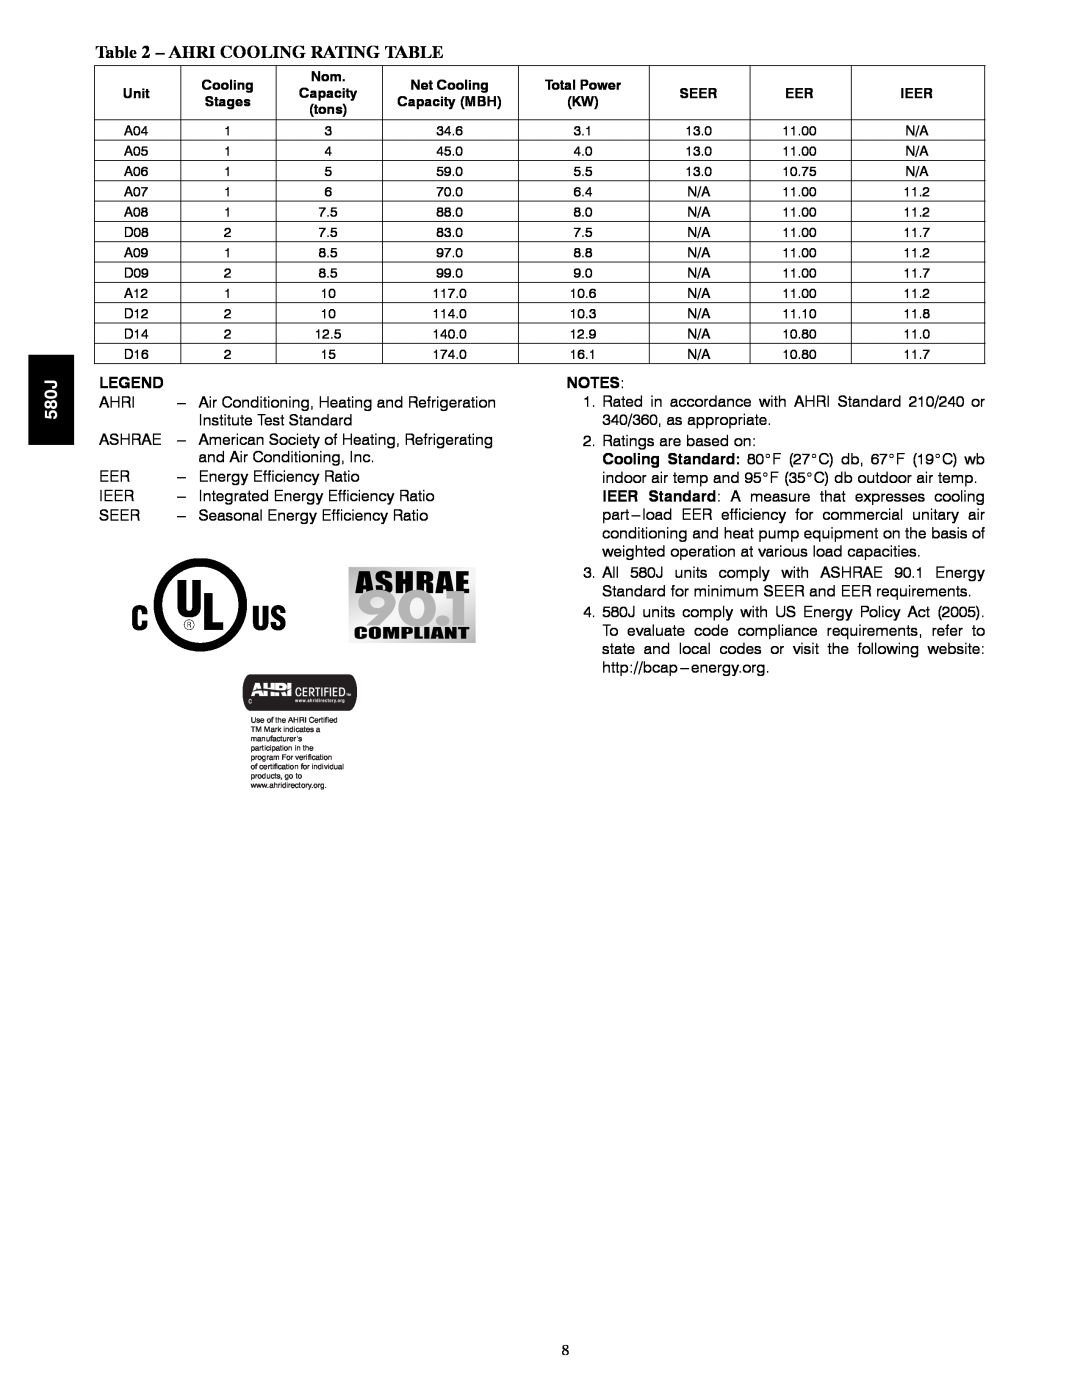 Bryant 580J manual Ahri Cooling Rating Table, Legend, Notes 